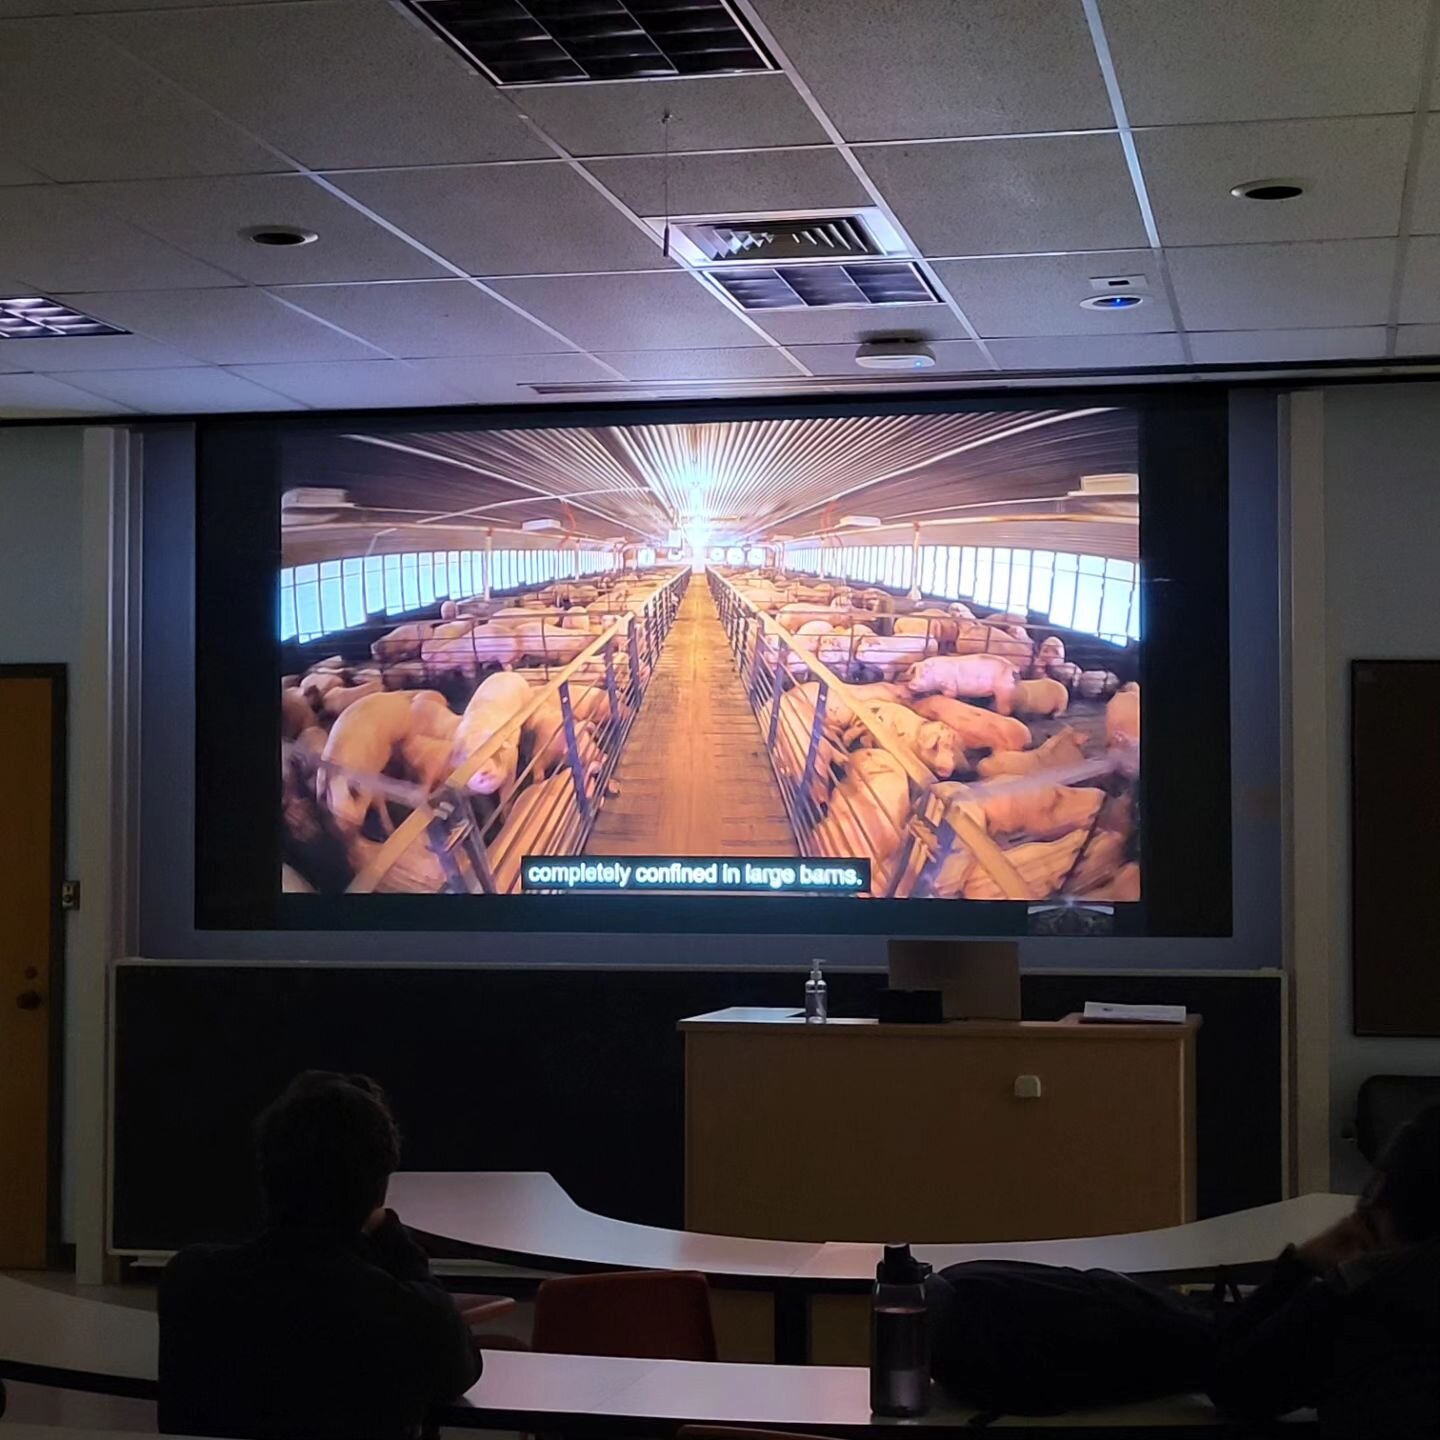 Movie Screening: The Smell of Money

Today we learned about how animal industries harm people, especially people of color.

If you're interested in going vegan, we're here to help! Join ASP at UT!